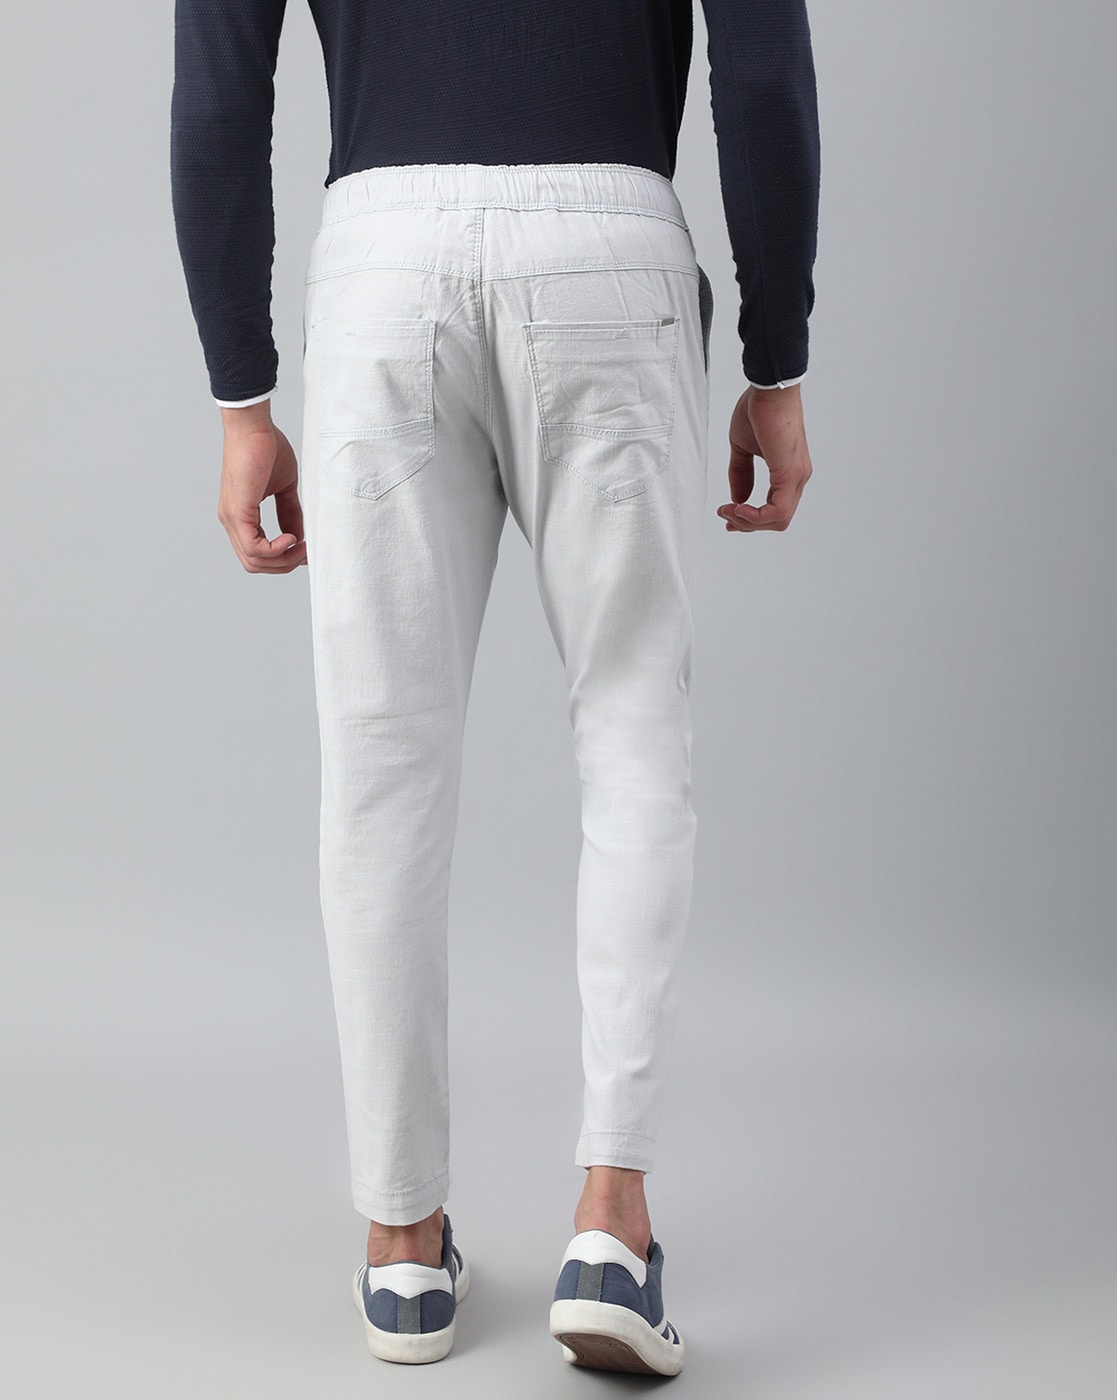 Off White Premium Terry Cargo Pants For Mens | Pronk – pronk.in